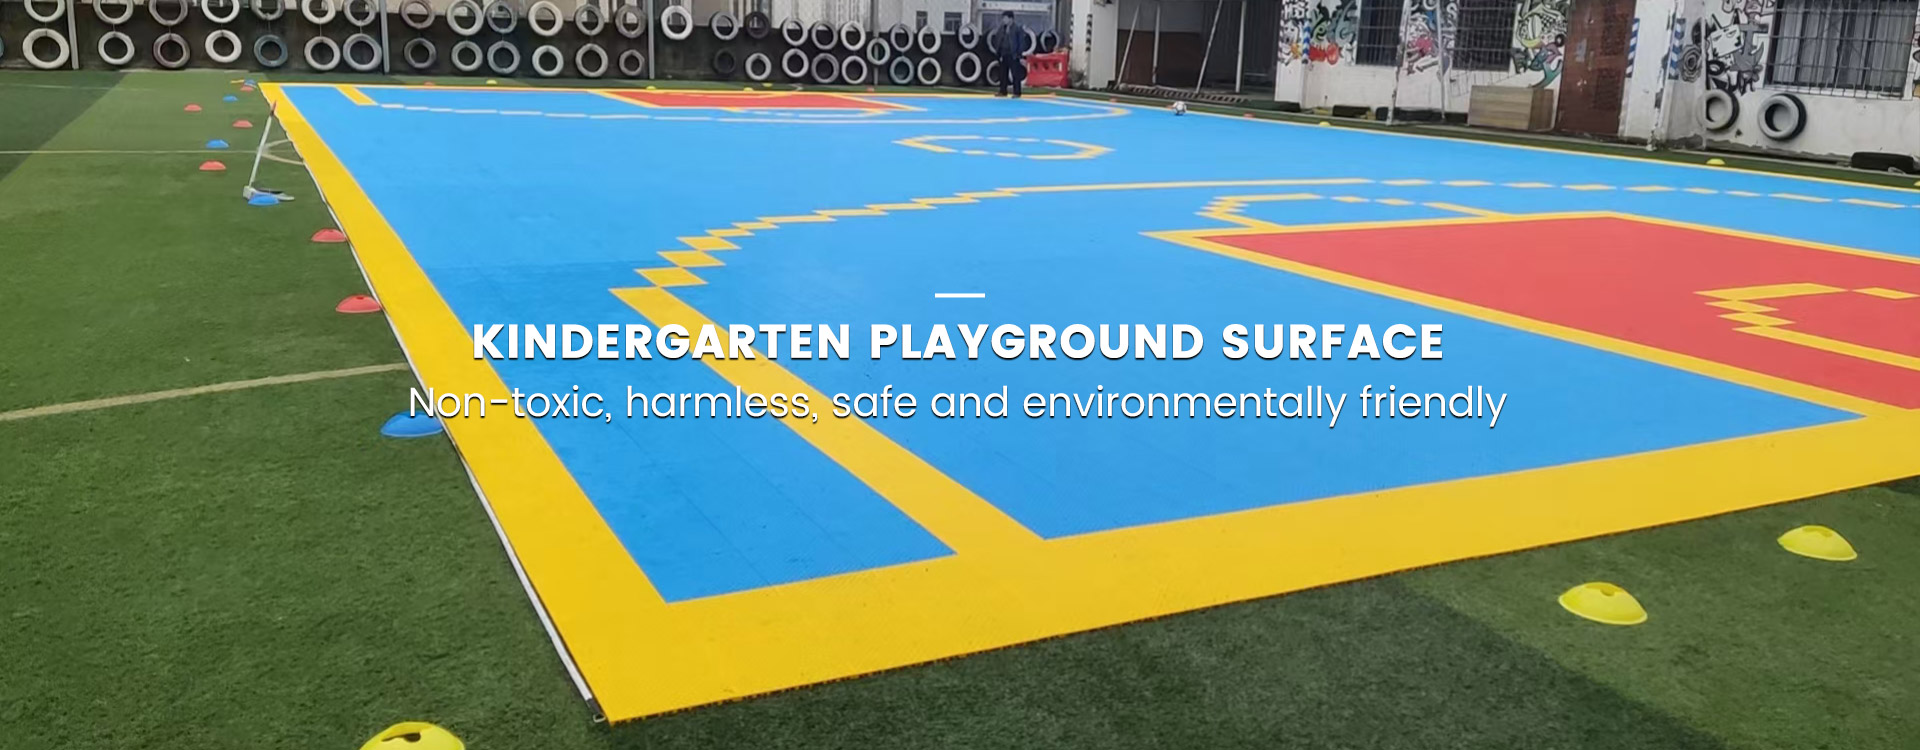 All Kinds of Sports Courts Interlocking Flooring